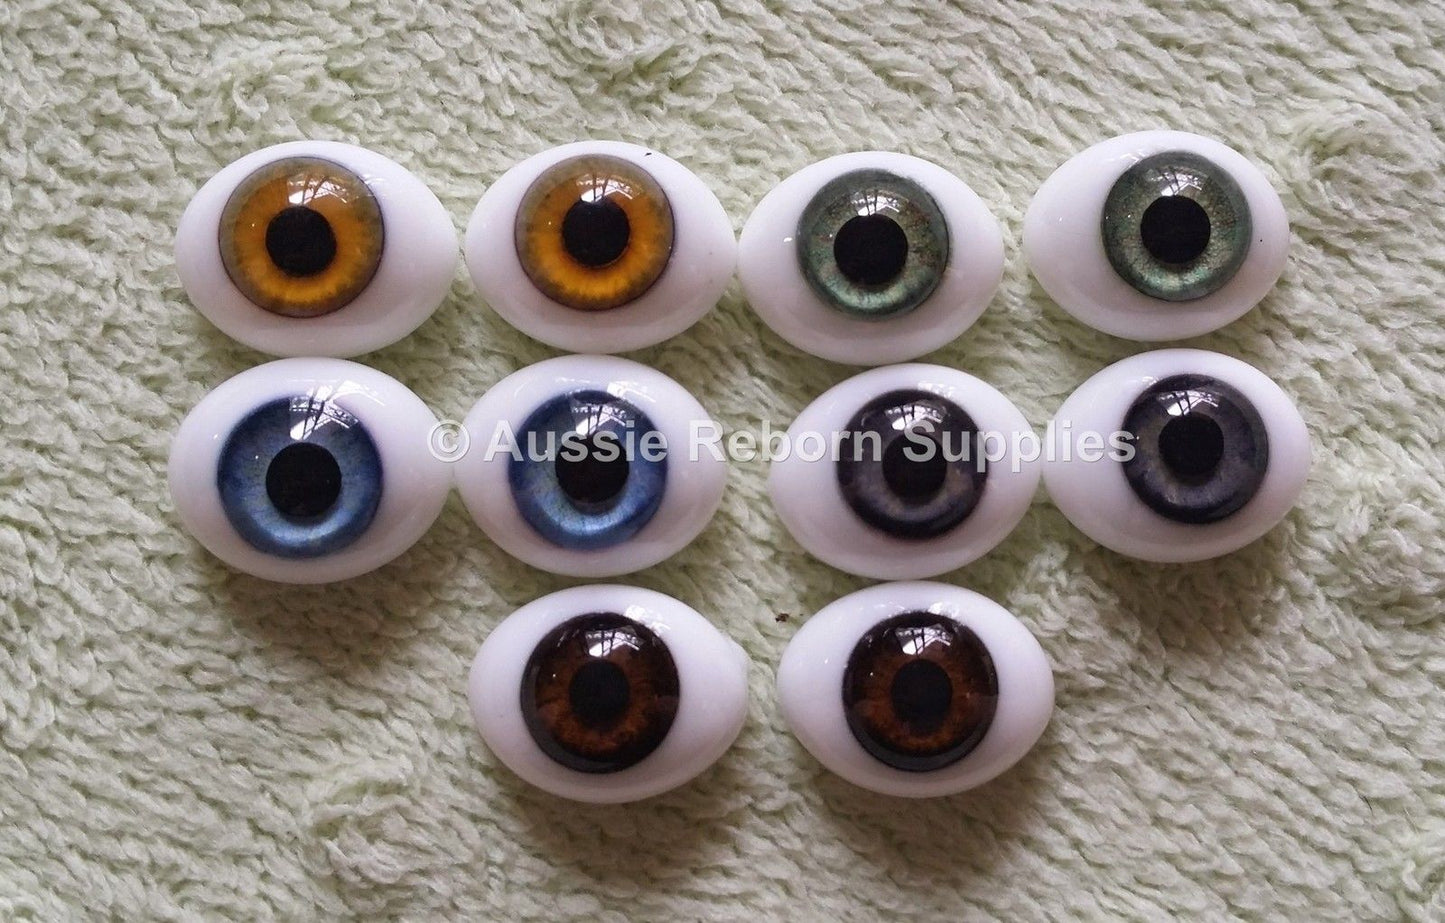 14mm Meadow Green Oval Glass Eyes Reborn Baby Doll Making Supplies